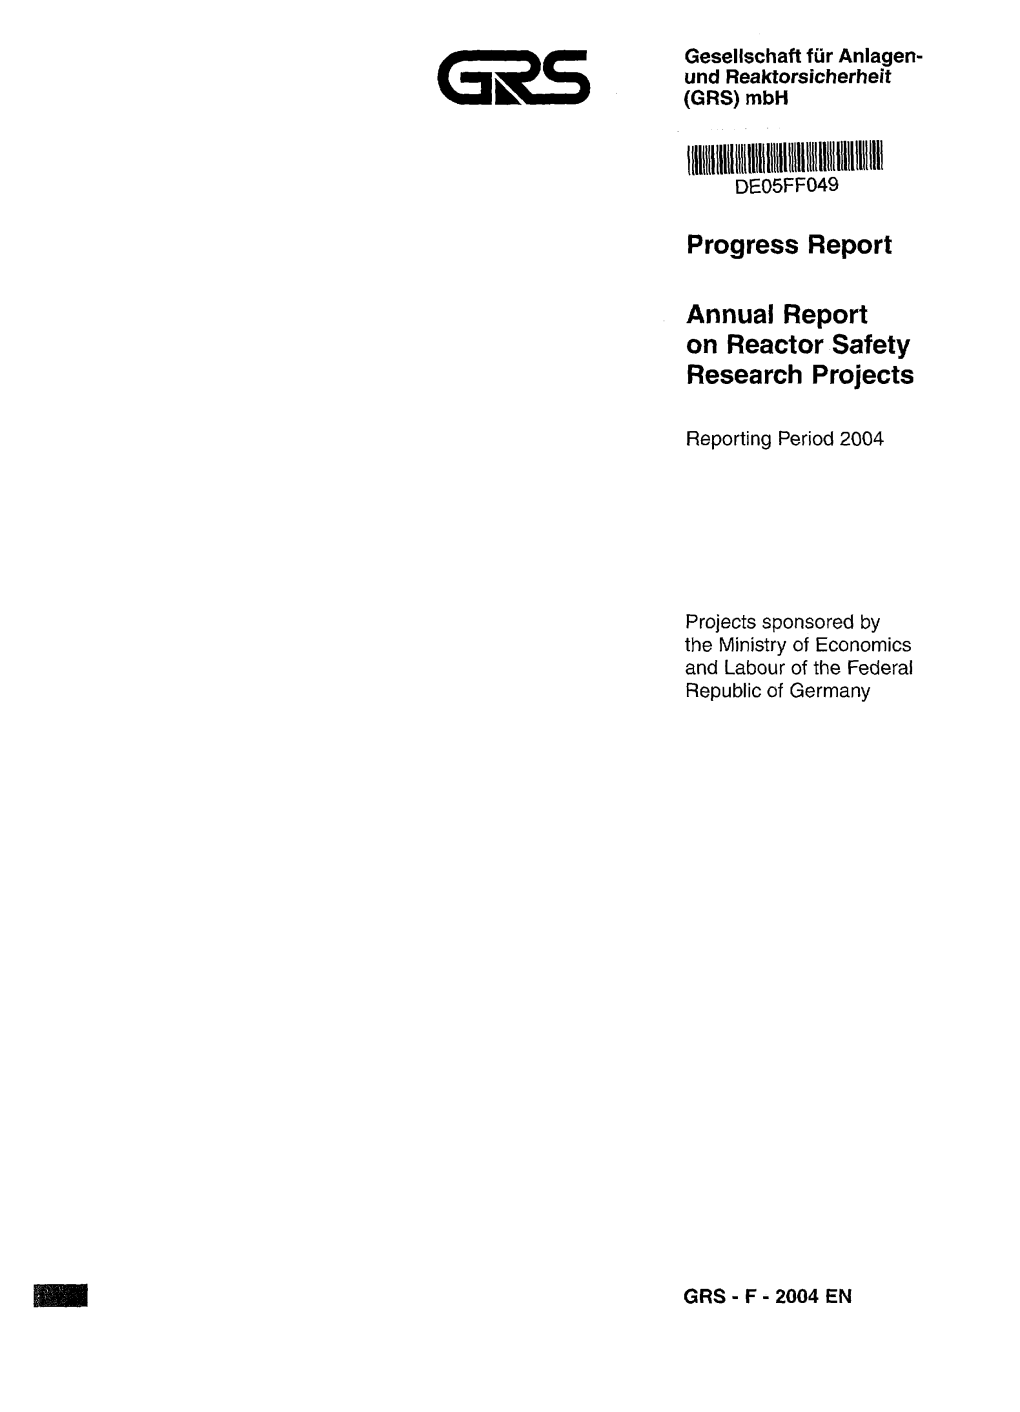 Progress Report Annual Report on Reactor Safety Research Projects